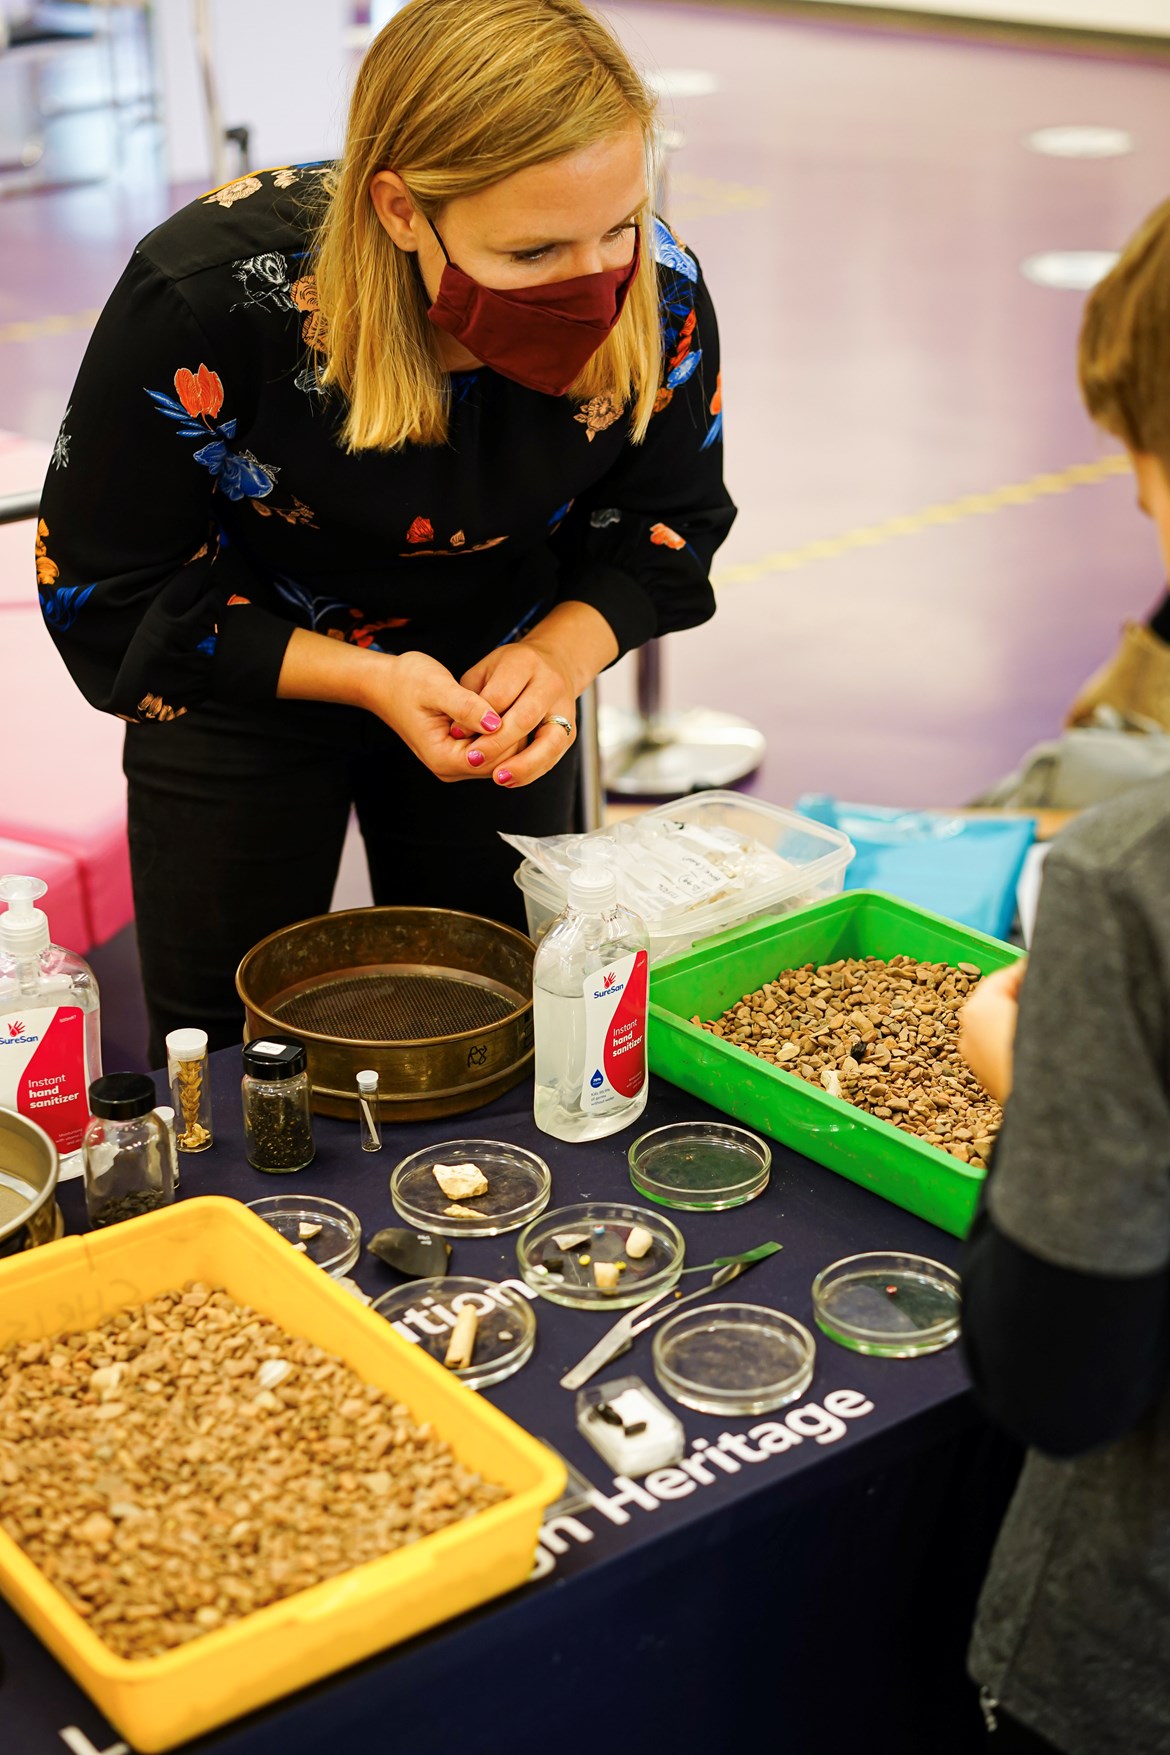 HS2 contractors help establish new Young Archaeologists’ Club in Solihull: Young Archaeologists' Club taster day at The Core in Solihull